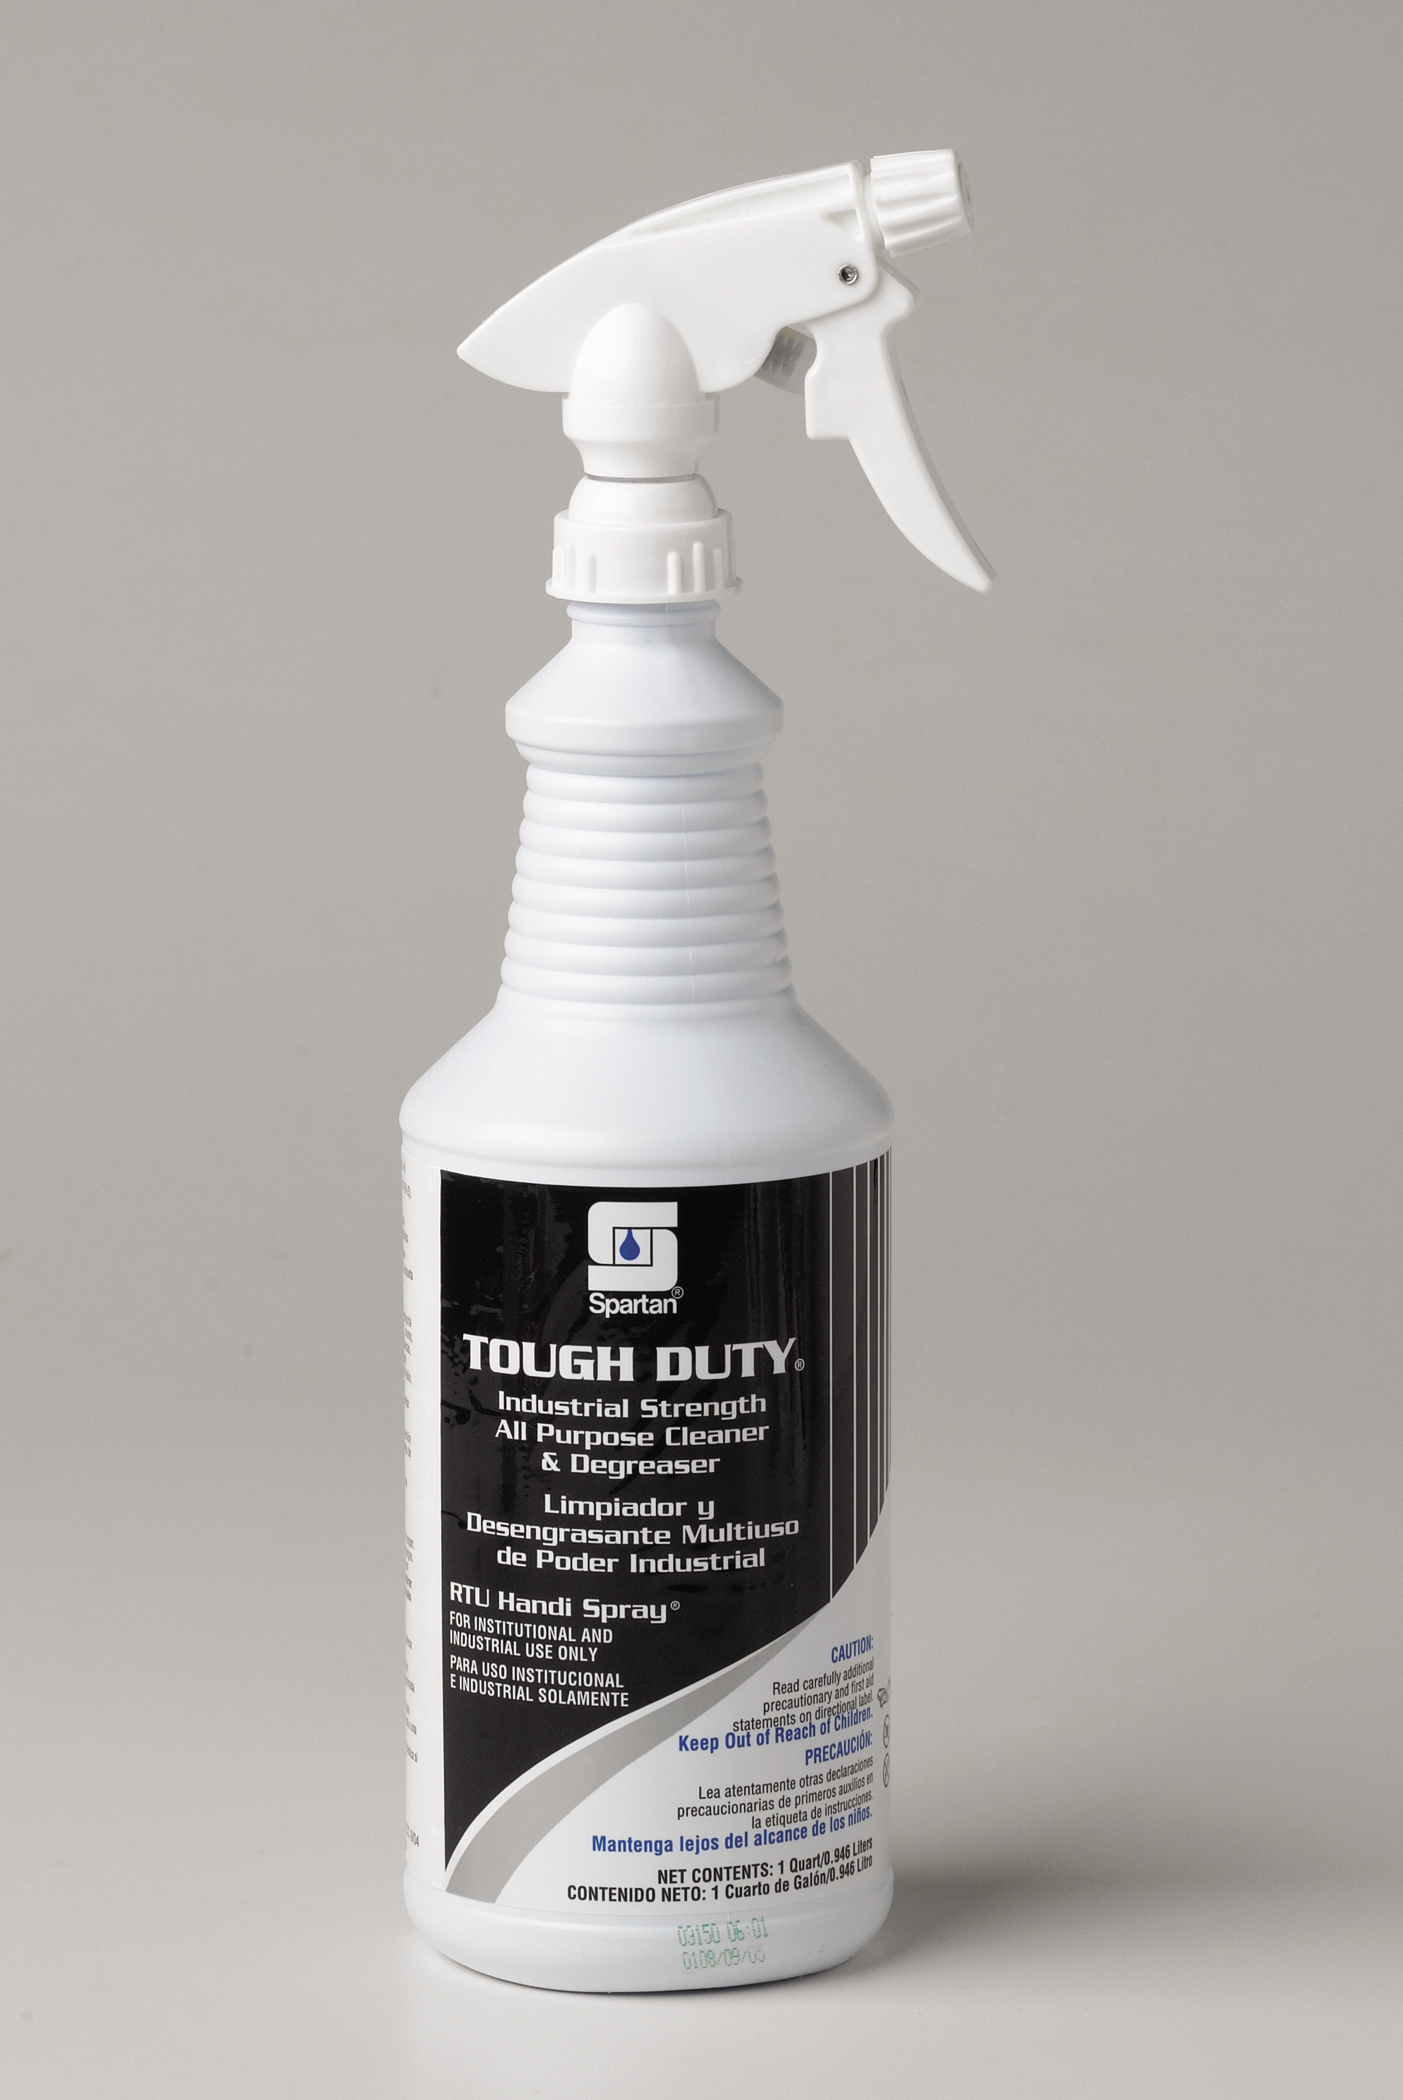 Tough Duty butyl-based cleaner & degreaser effectively removes grease, grime, and other soil